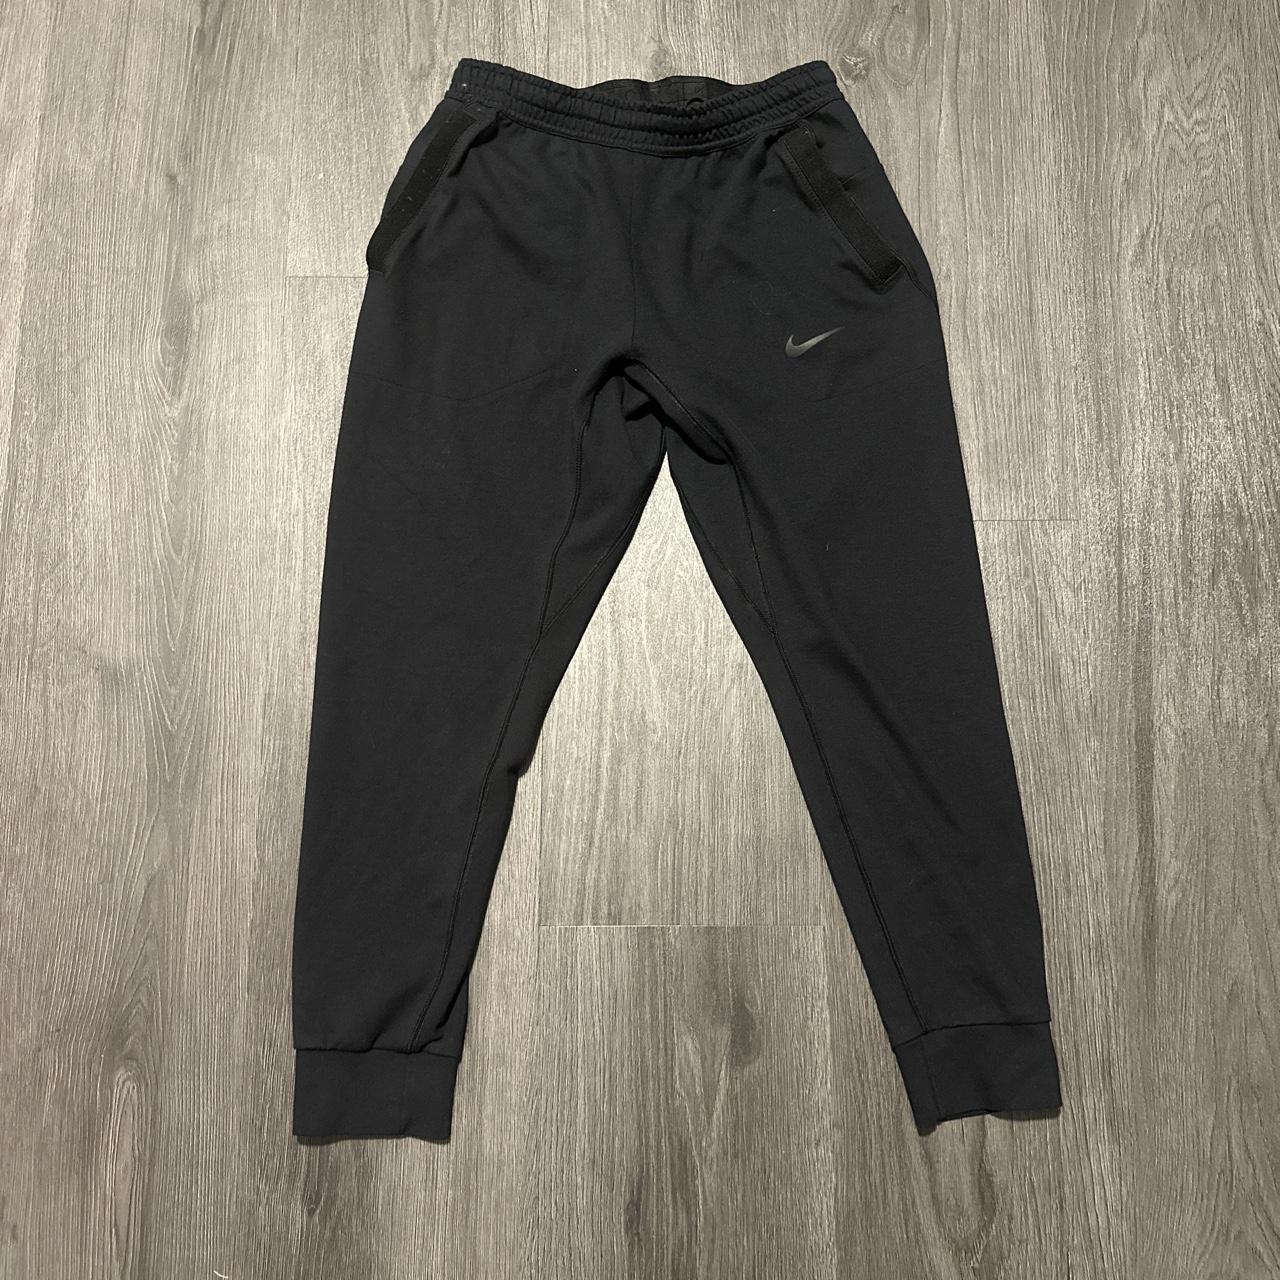 Nike sweats in great condition Size small and fits... - Depop